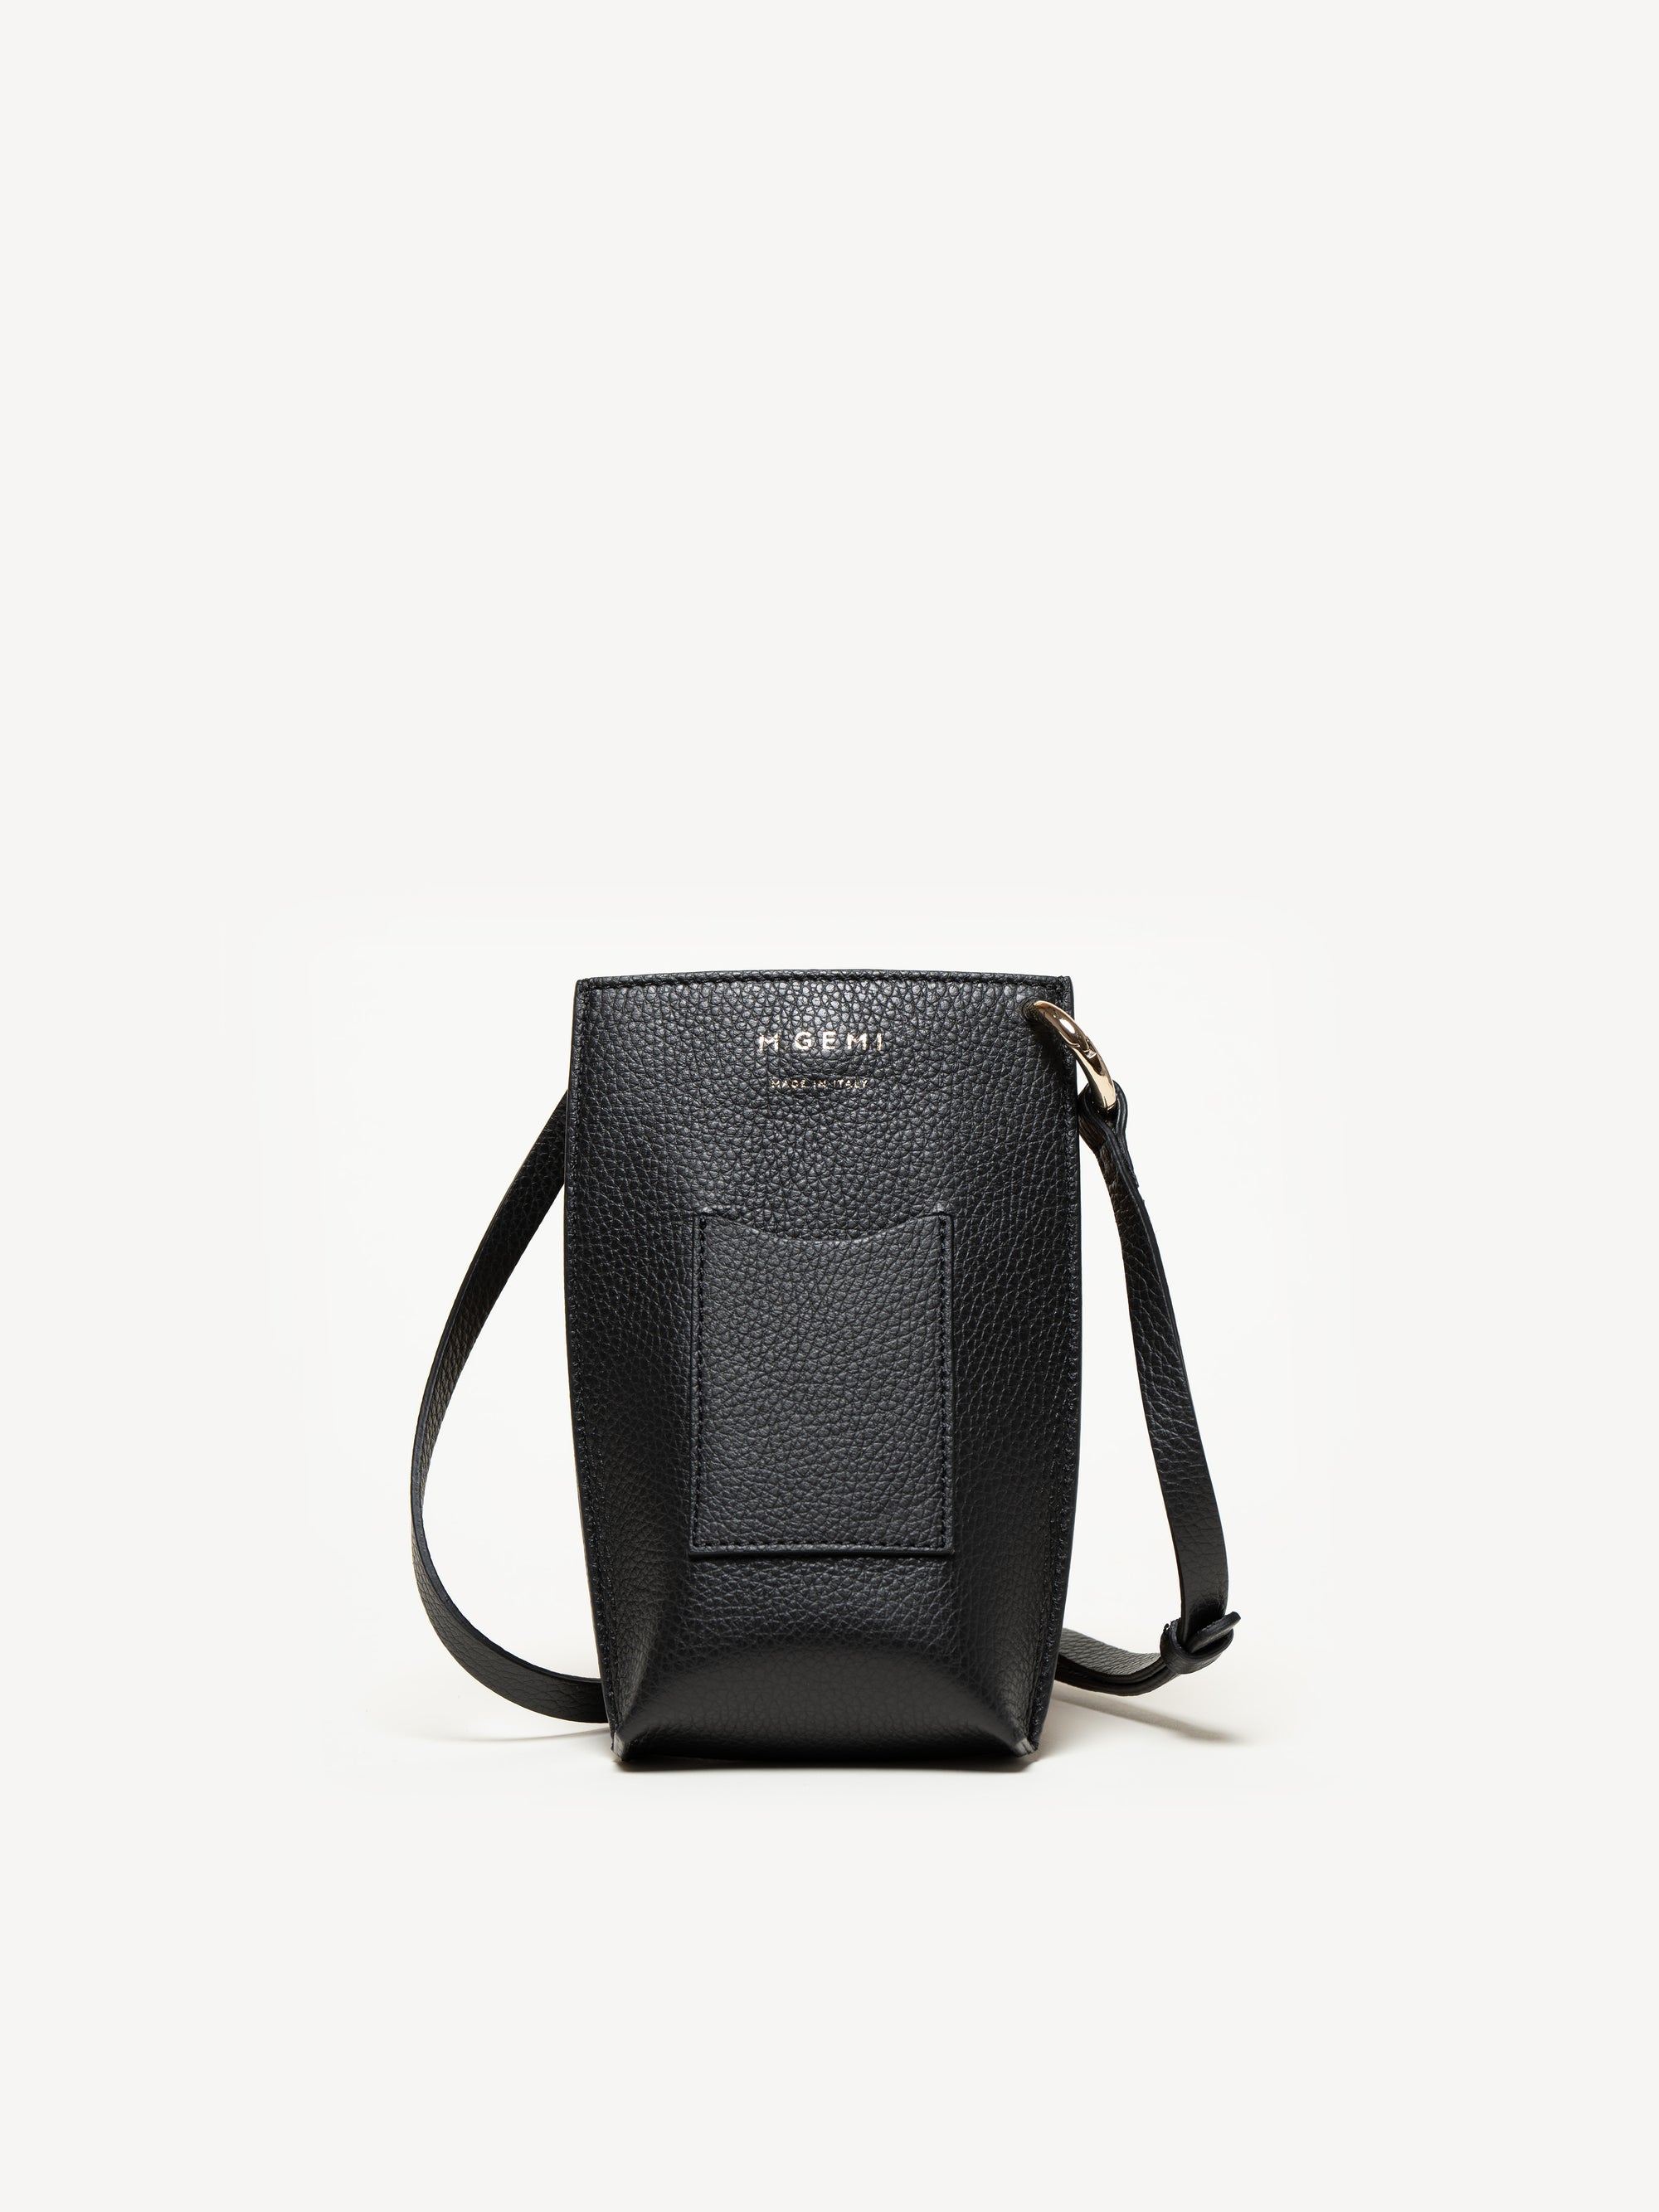 The Meena Faux Leather Crossbody in Grey